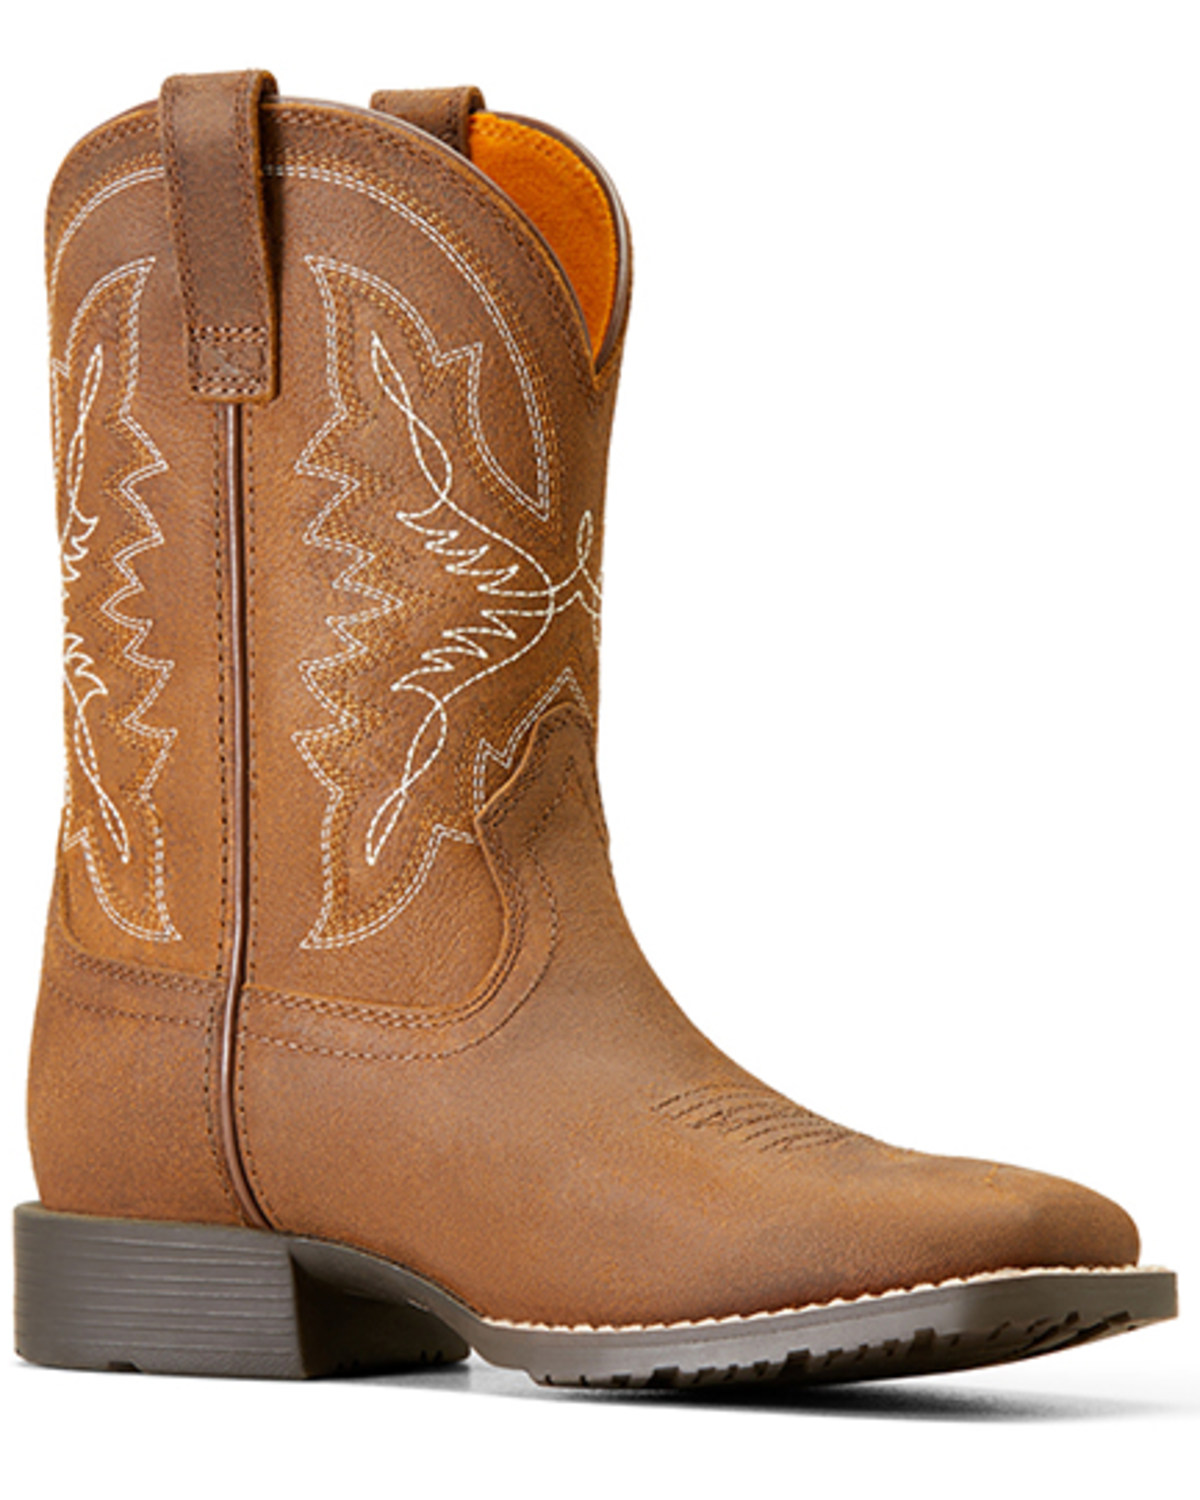 Ariat Boys' Hybrid Rancher Western Boots - Broad Square Toe